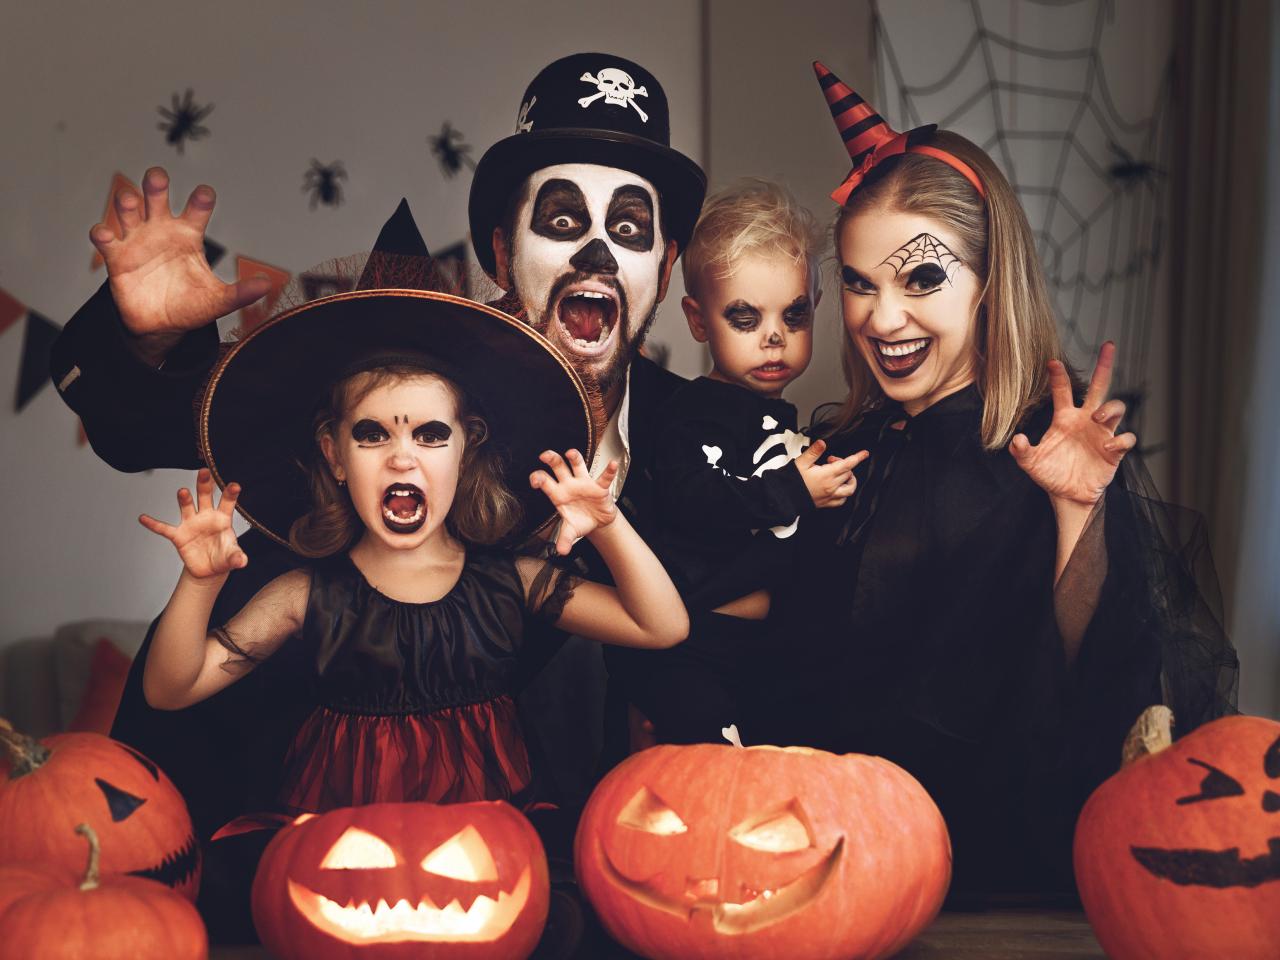 25 Halloween Costume Ideas for the Whole Family